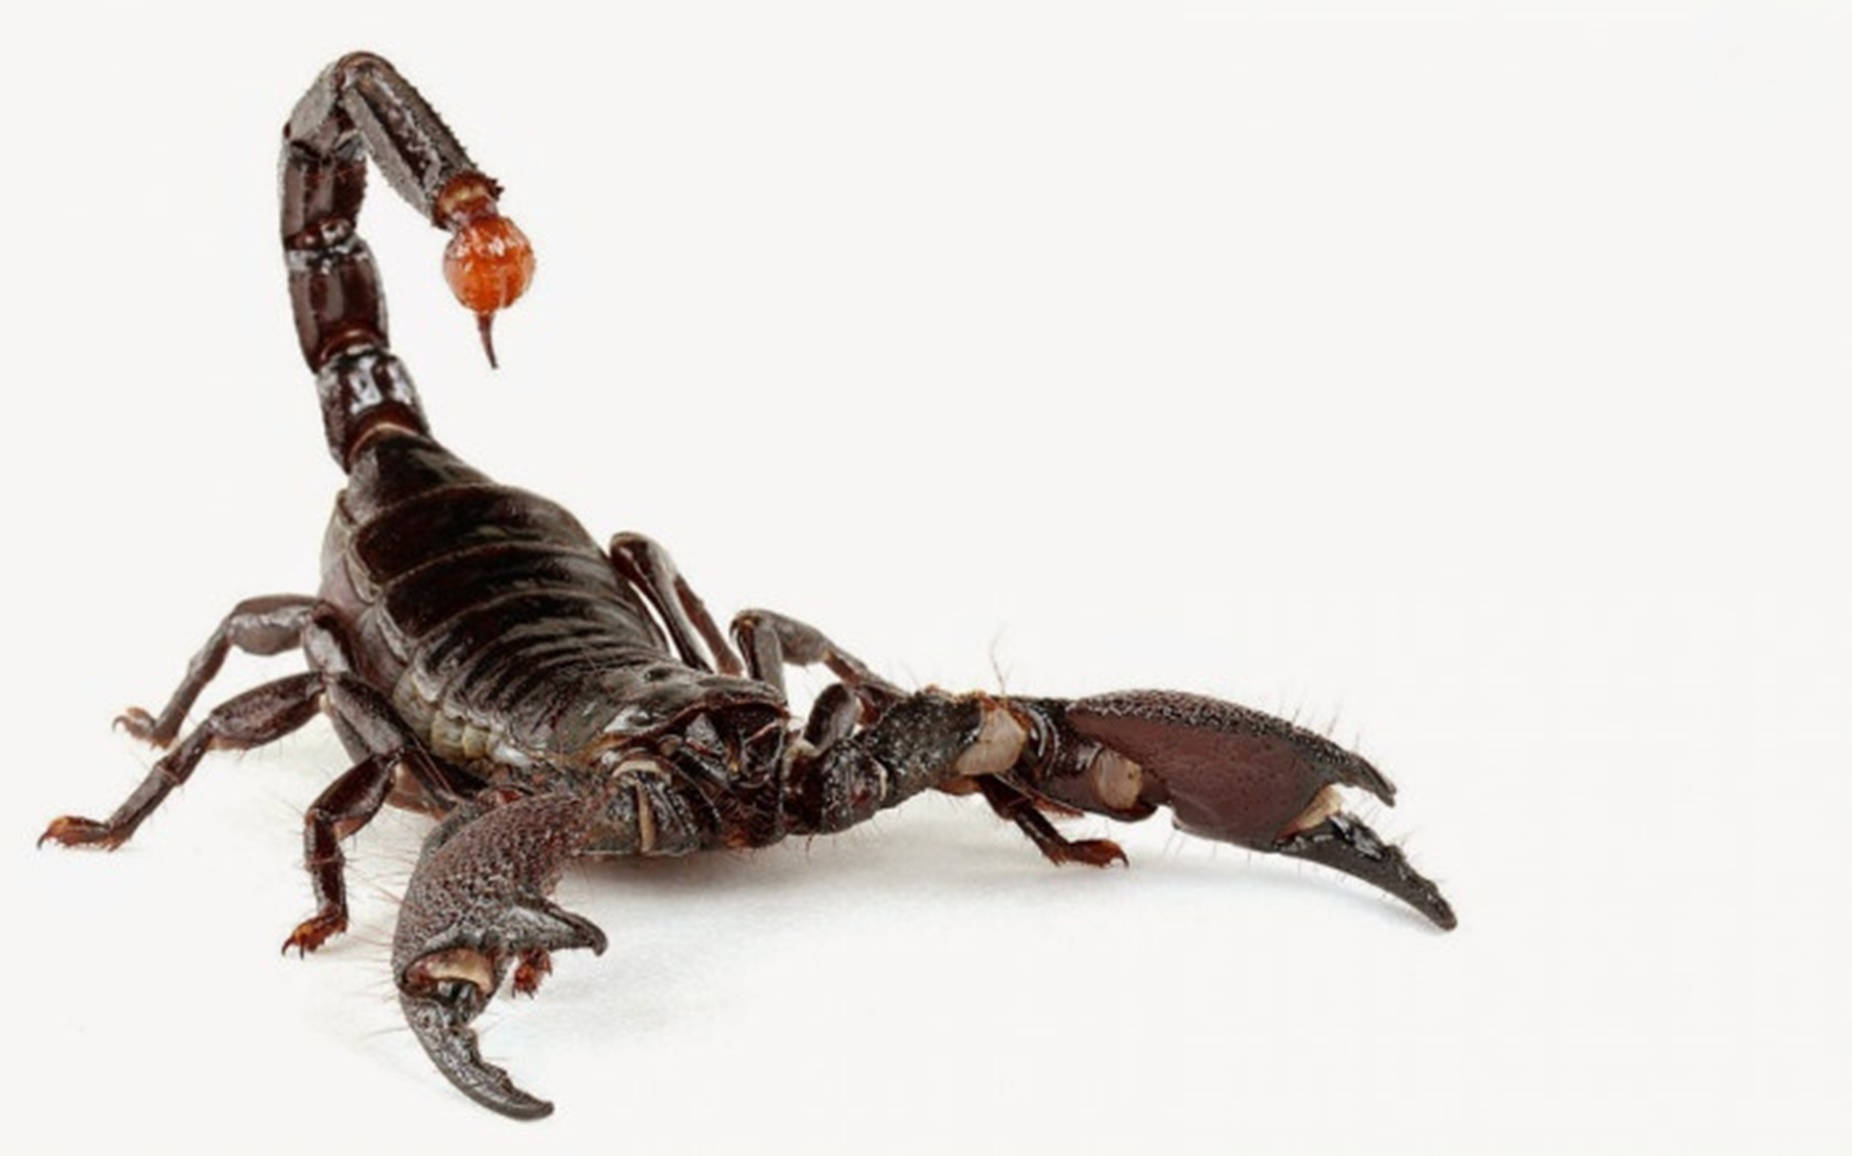 Scorpion HD Wallpaper for Android